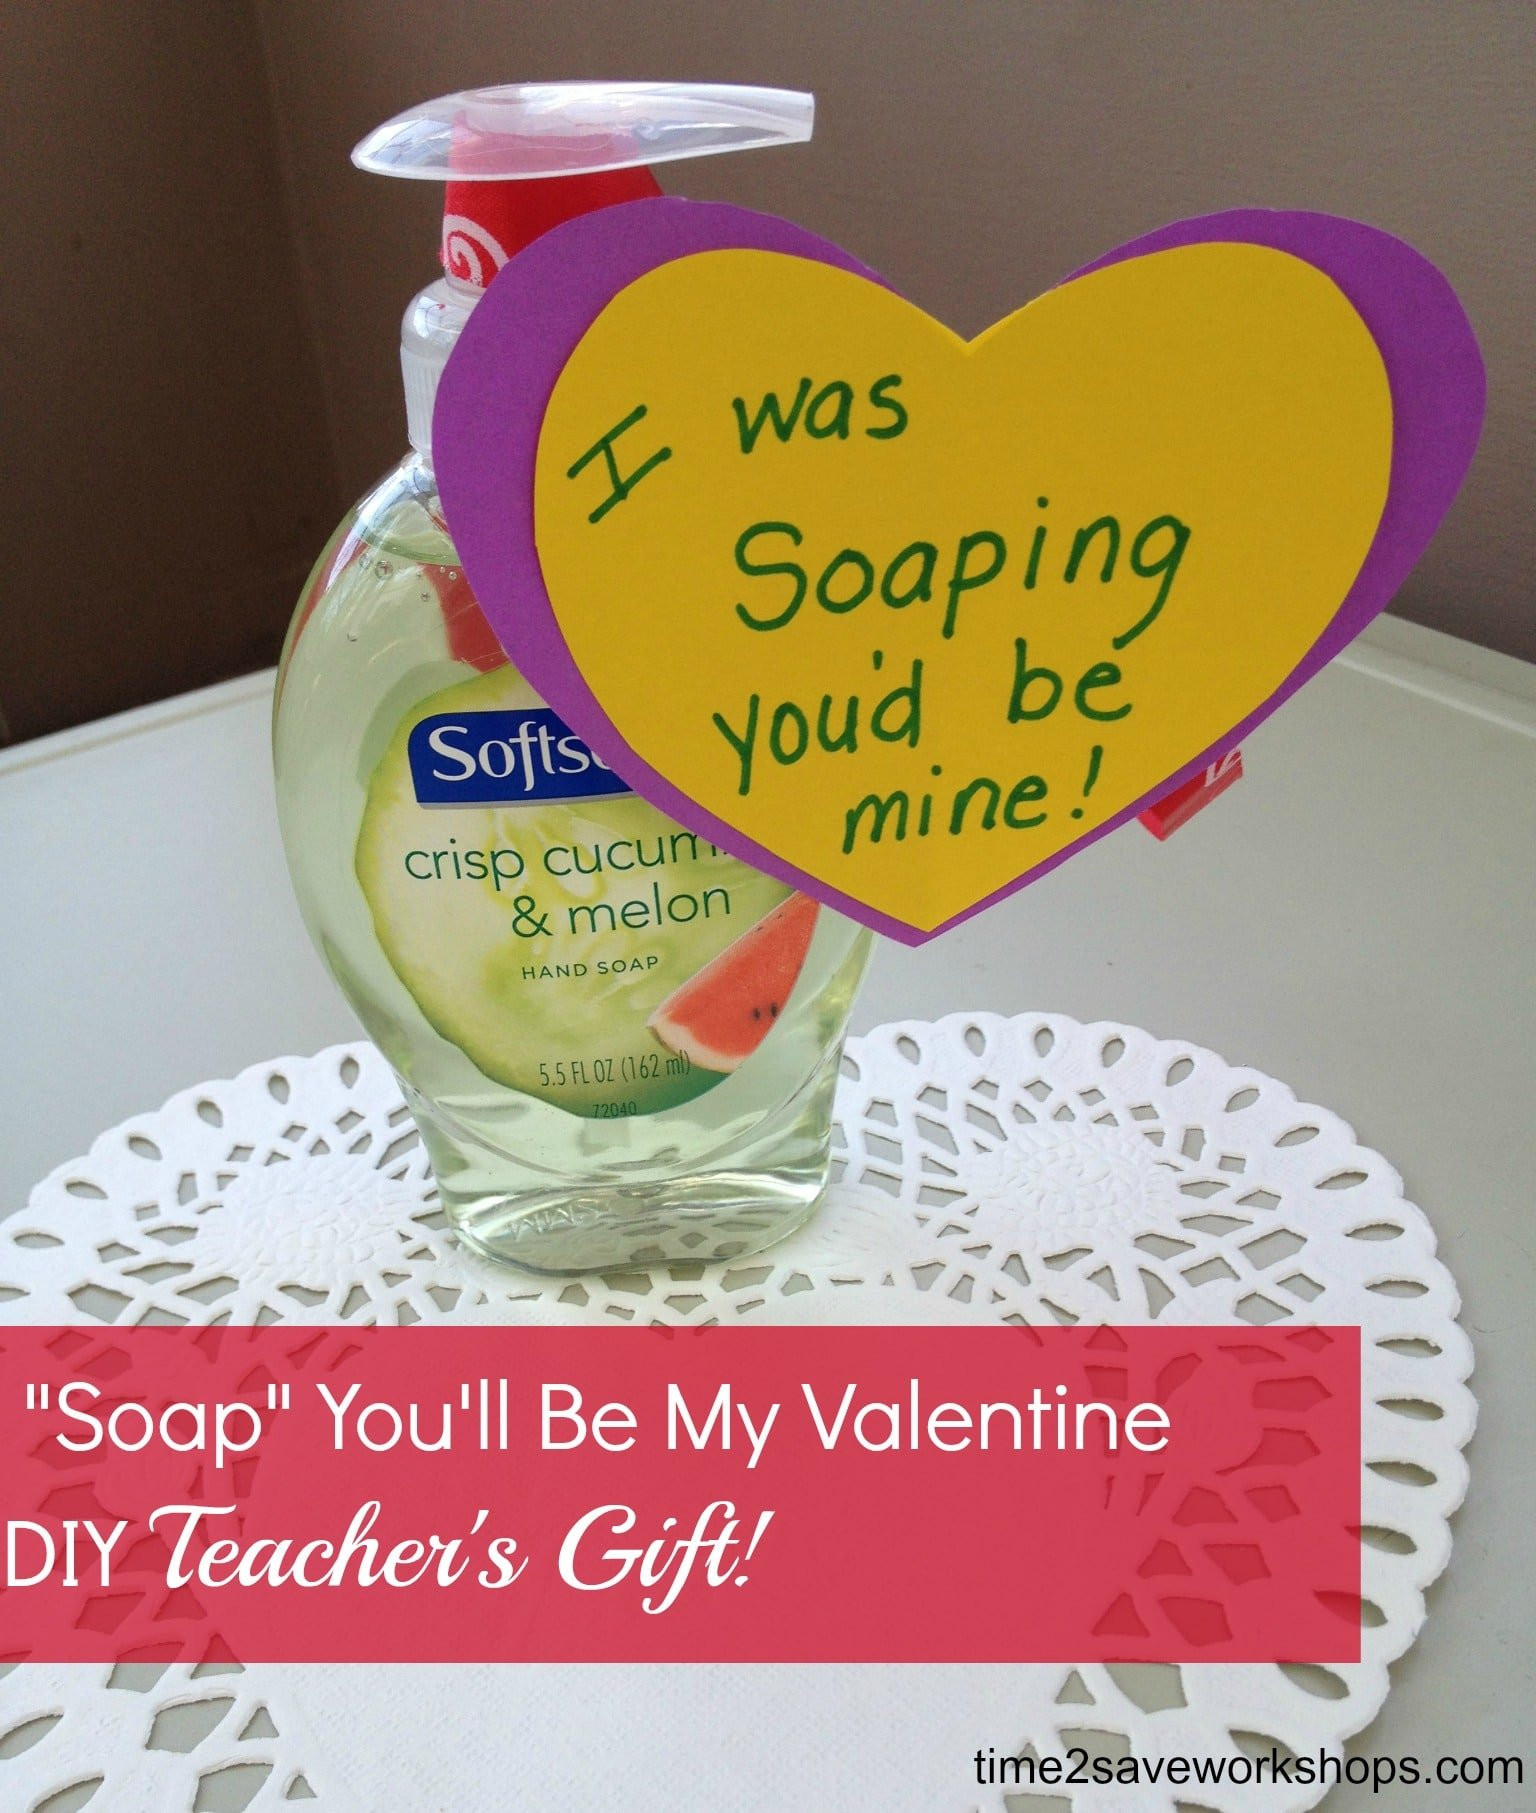 Be My Valentine Gift Ideas
 Homemade Valentine Gifts "Soap" You ll Be My Valentine